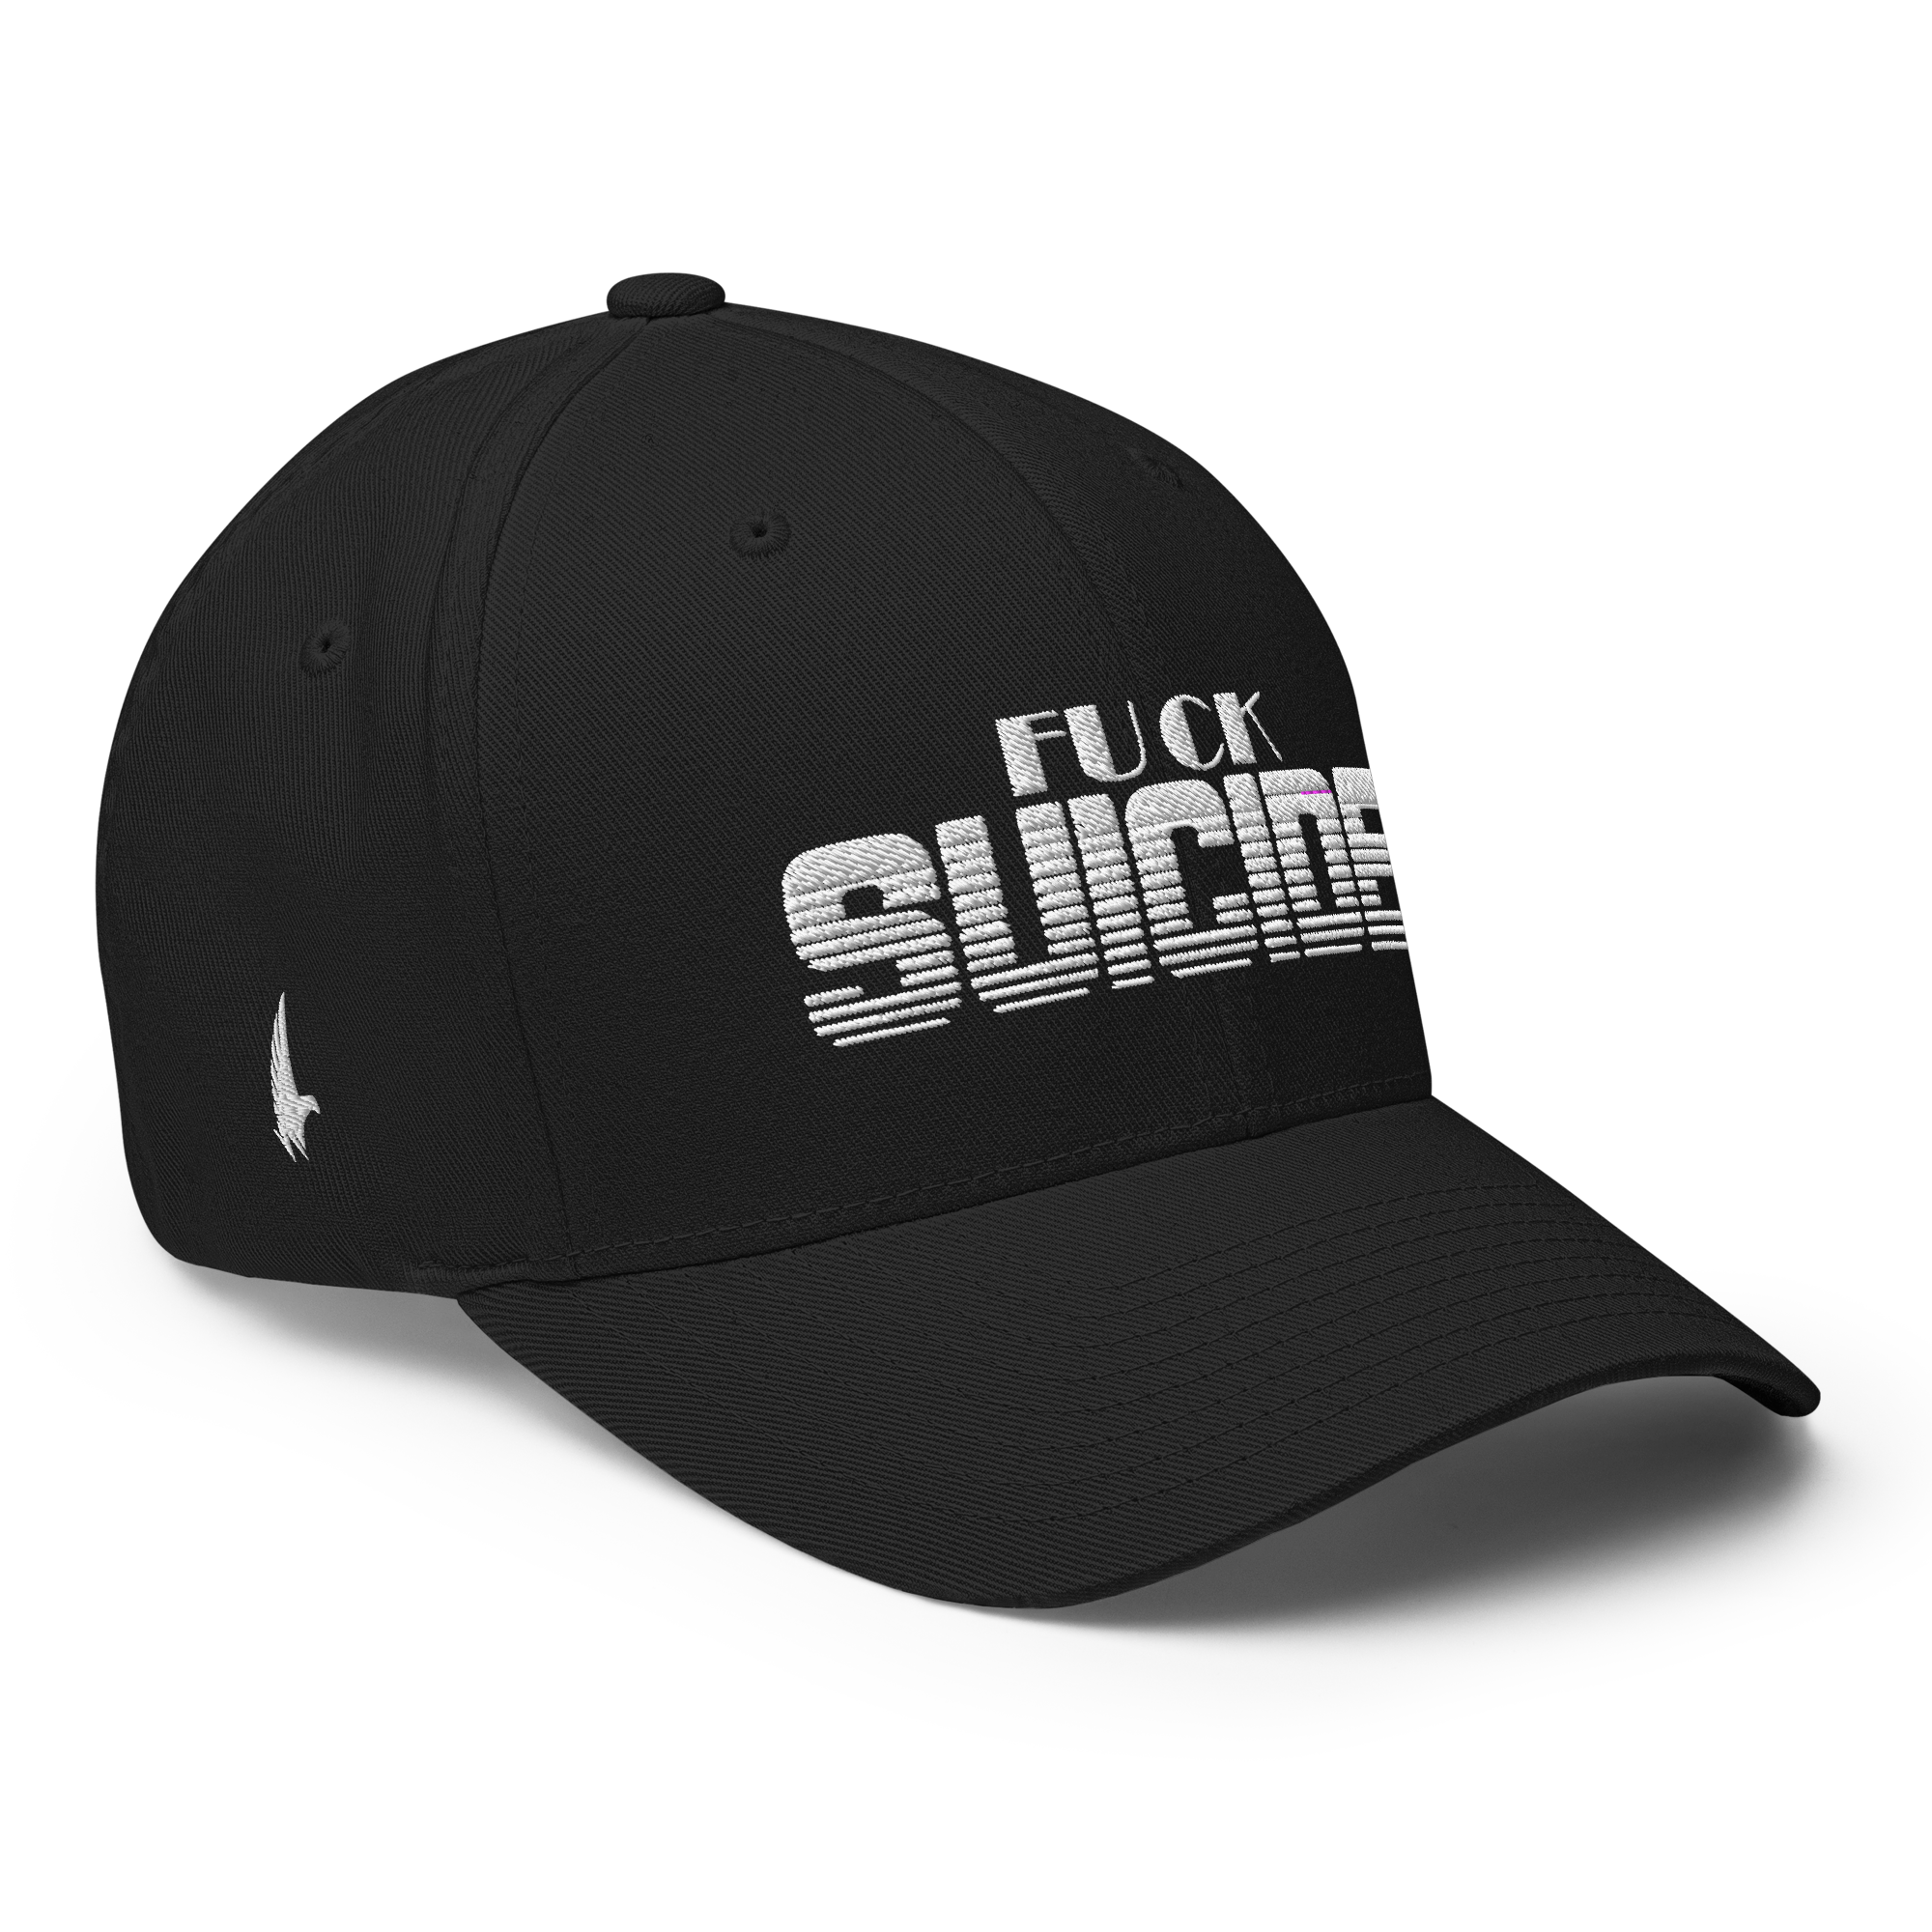 Fuck Suicide Fitted Hat - Black Fitted - Loyalty Vibes